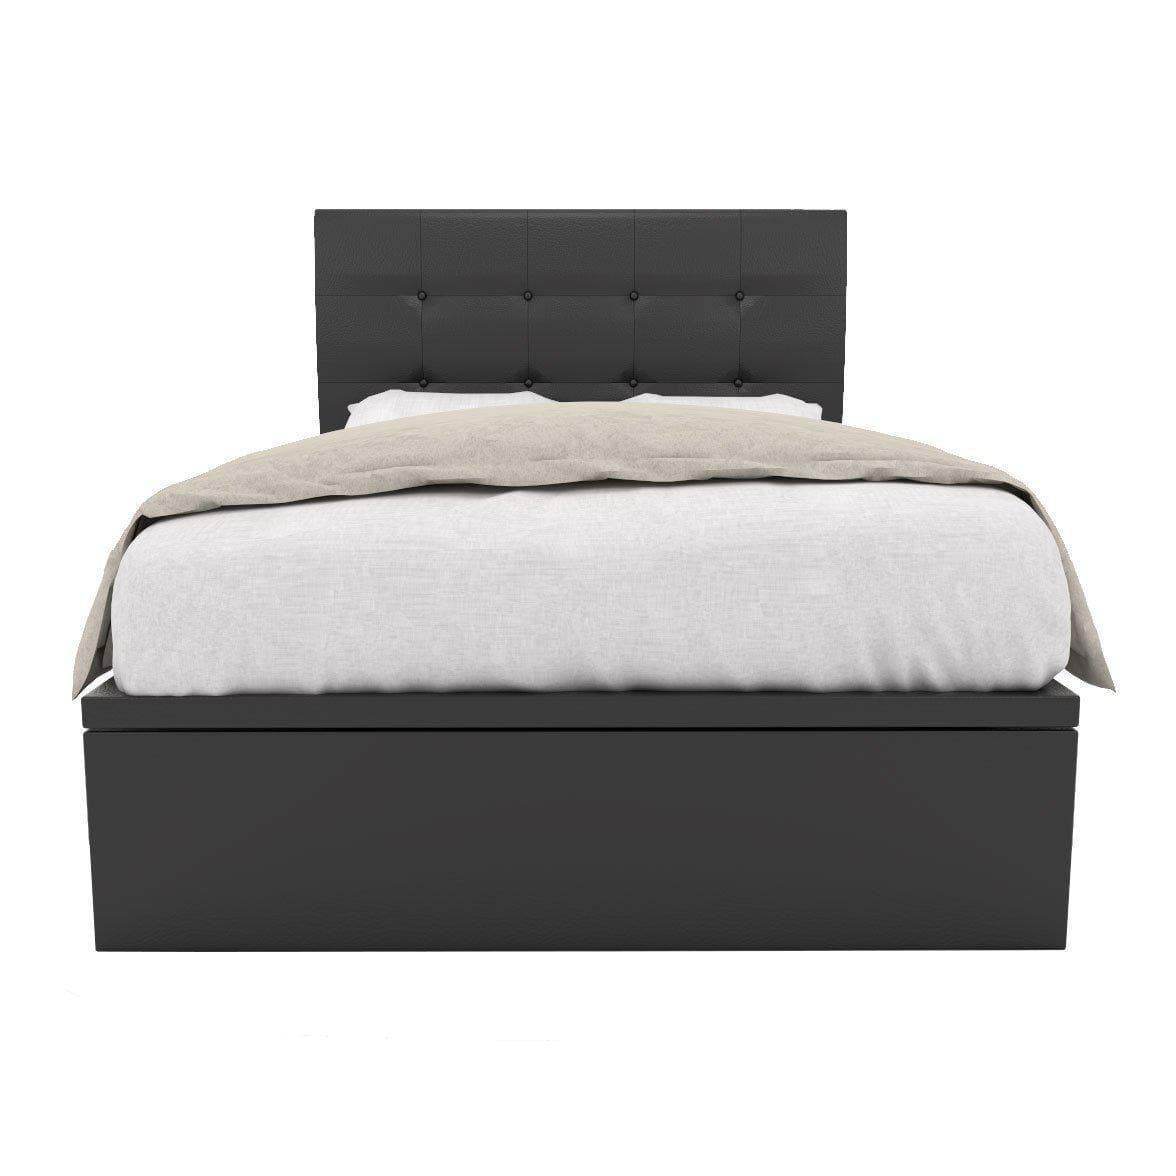 Ellie Faux Leather Storage Bed Singapore